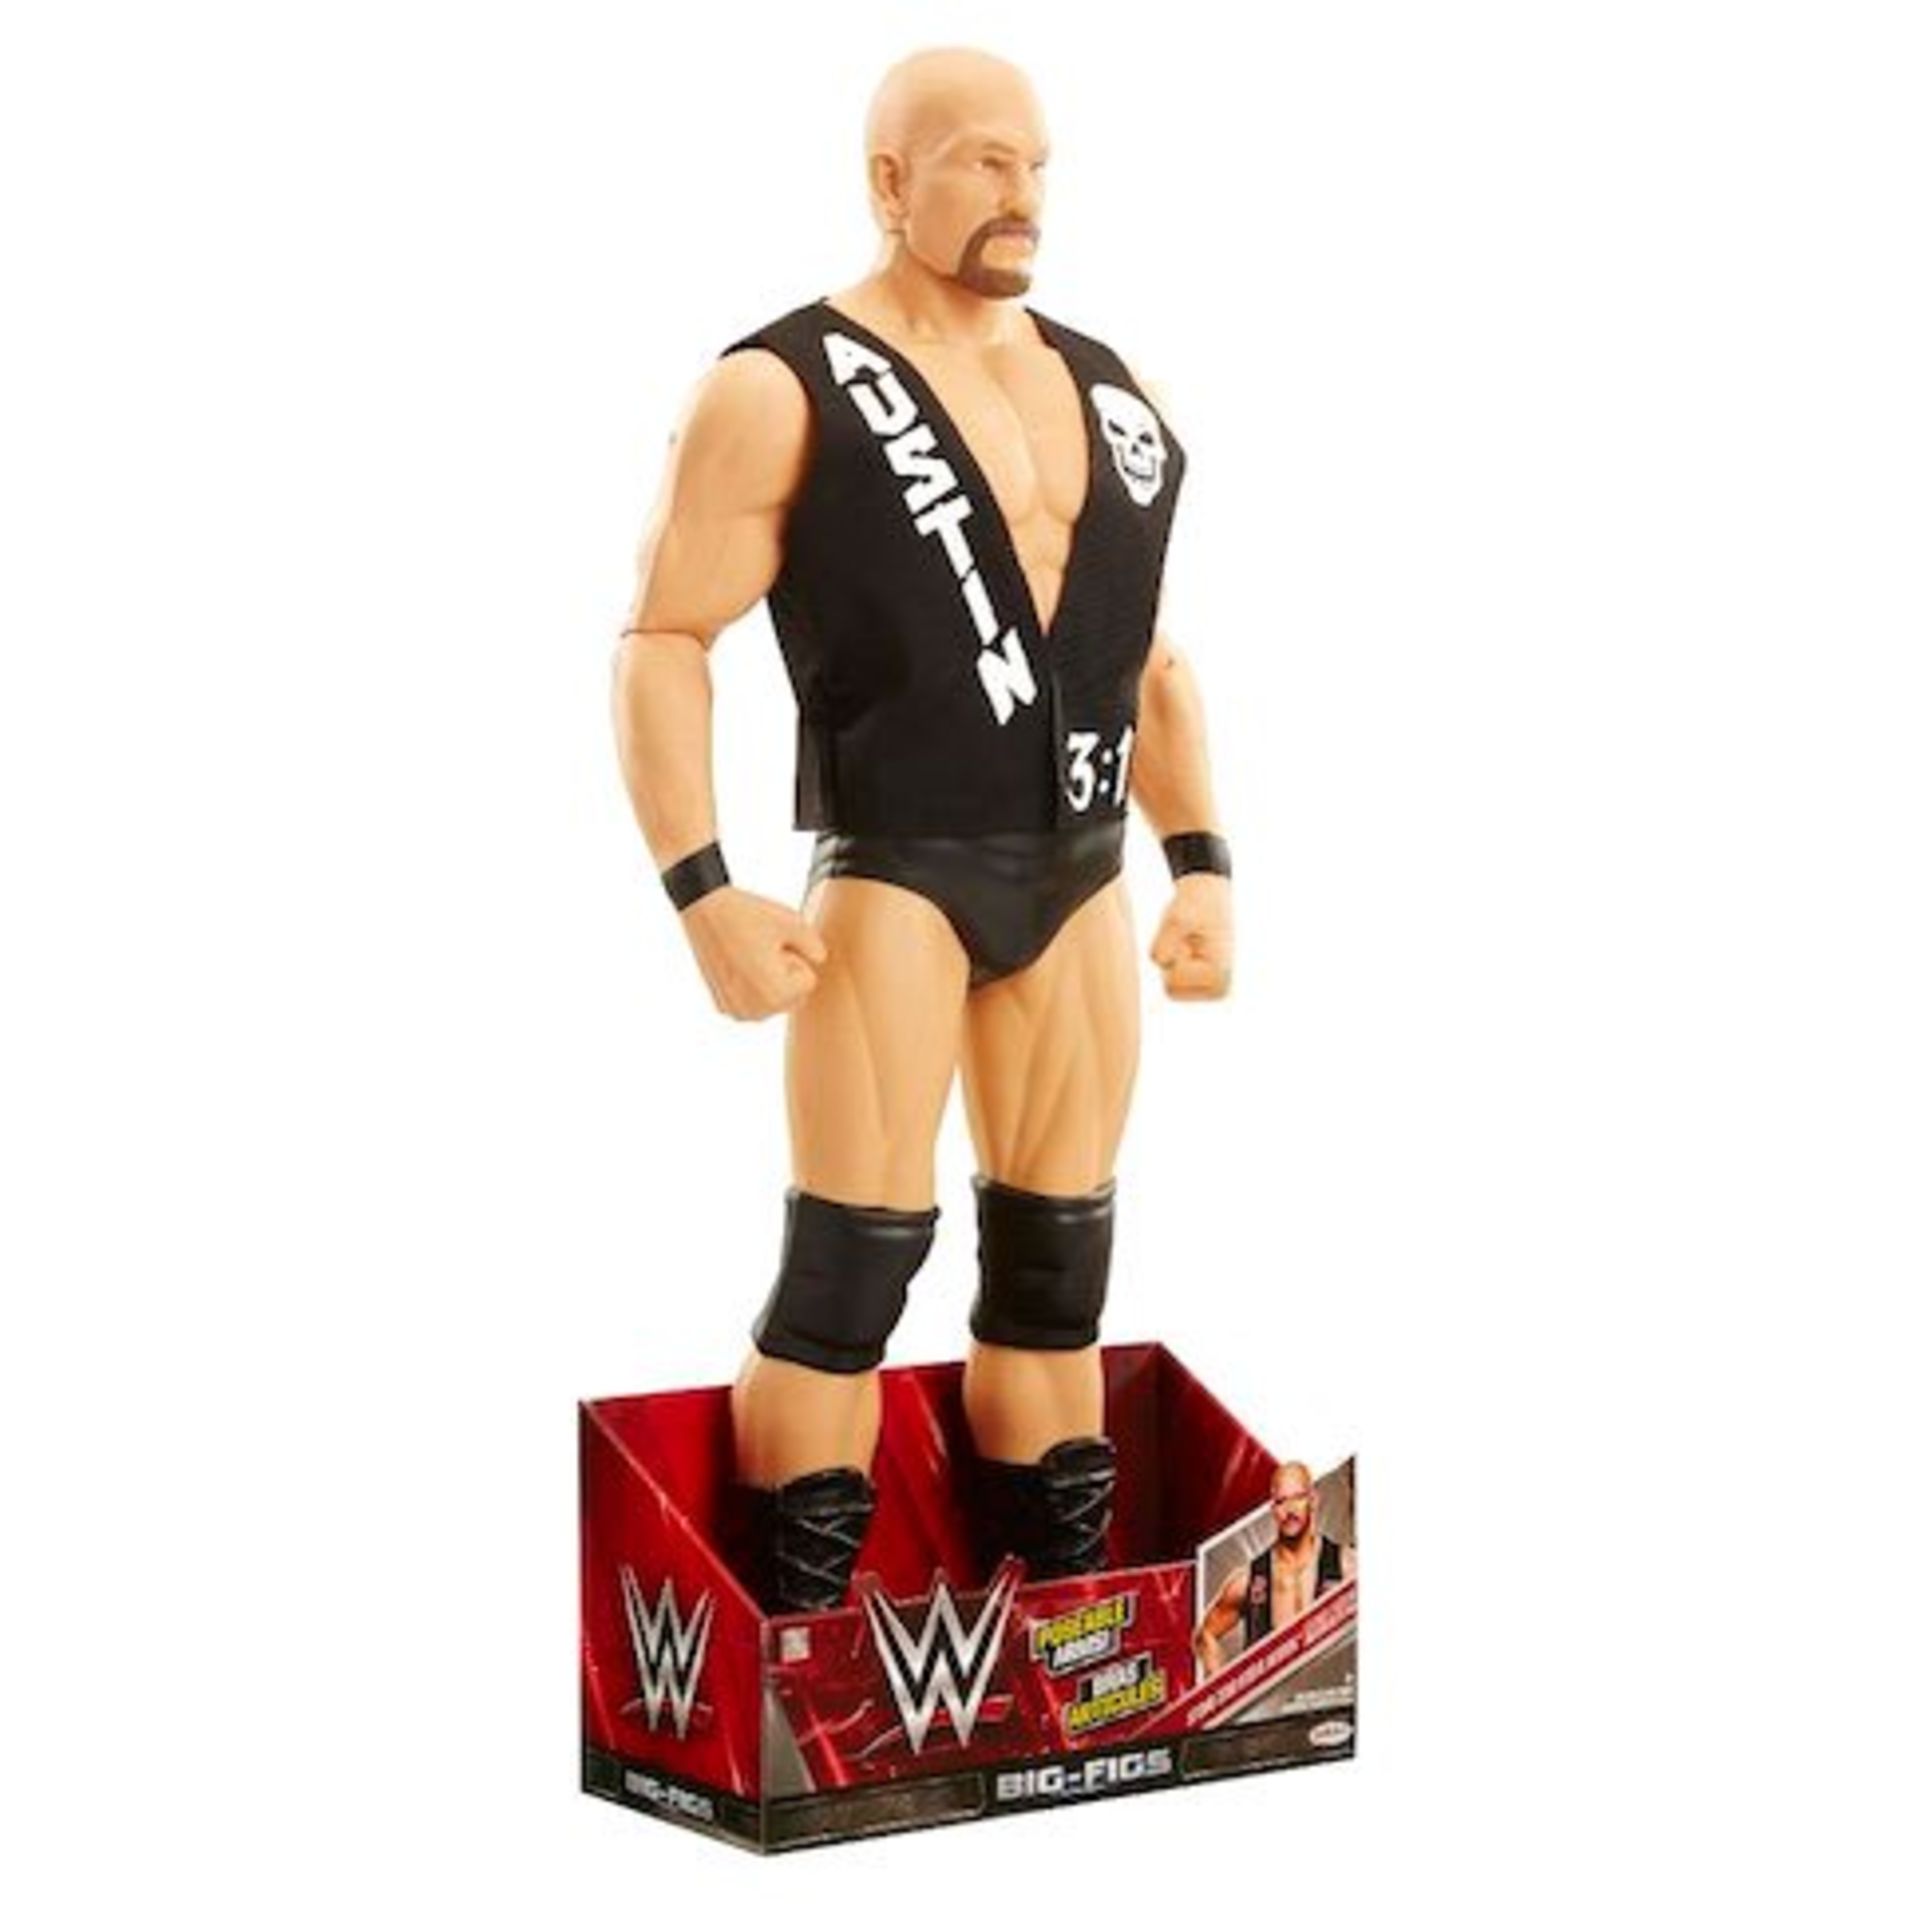 + VAT Brand New Massive 31" WWE Stone Cold Steve Austin Action Figures - 3count.co.uk Price £28. - Image 2 of 4